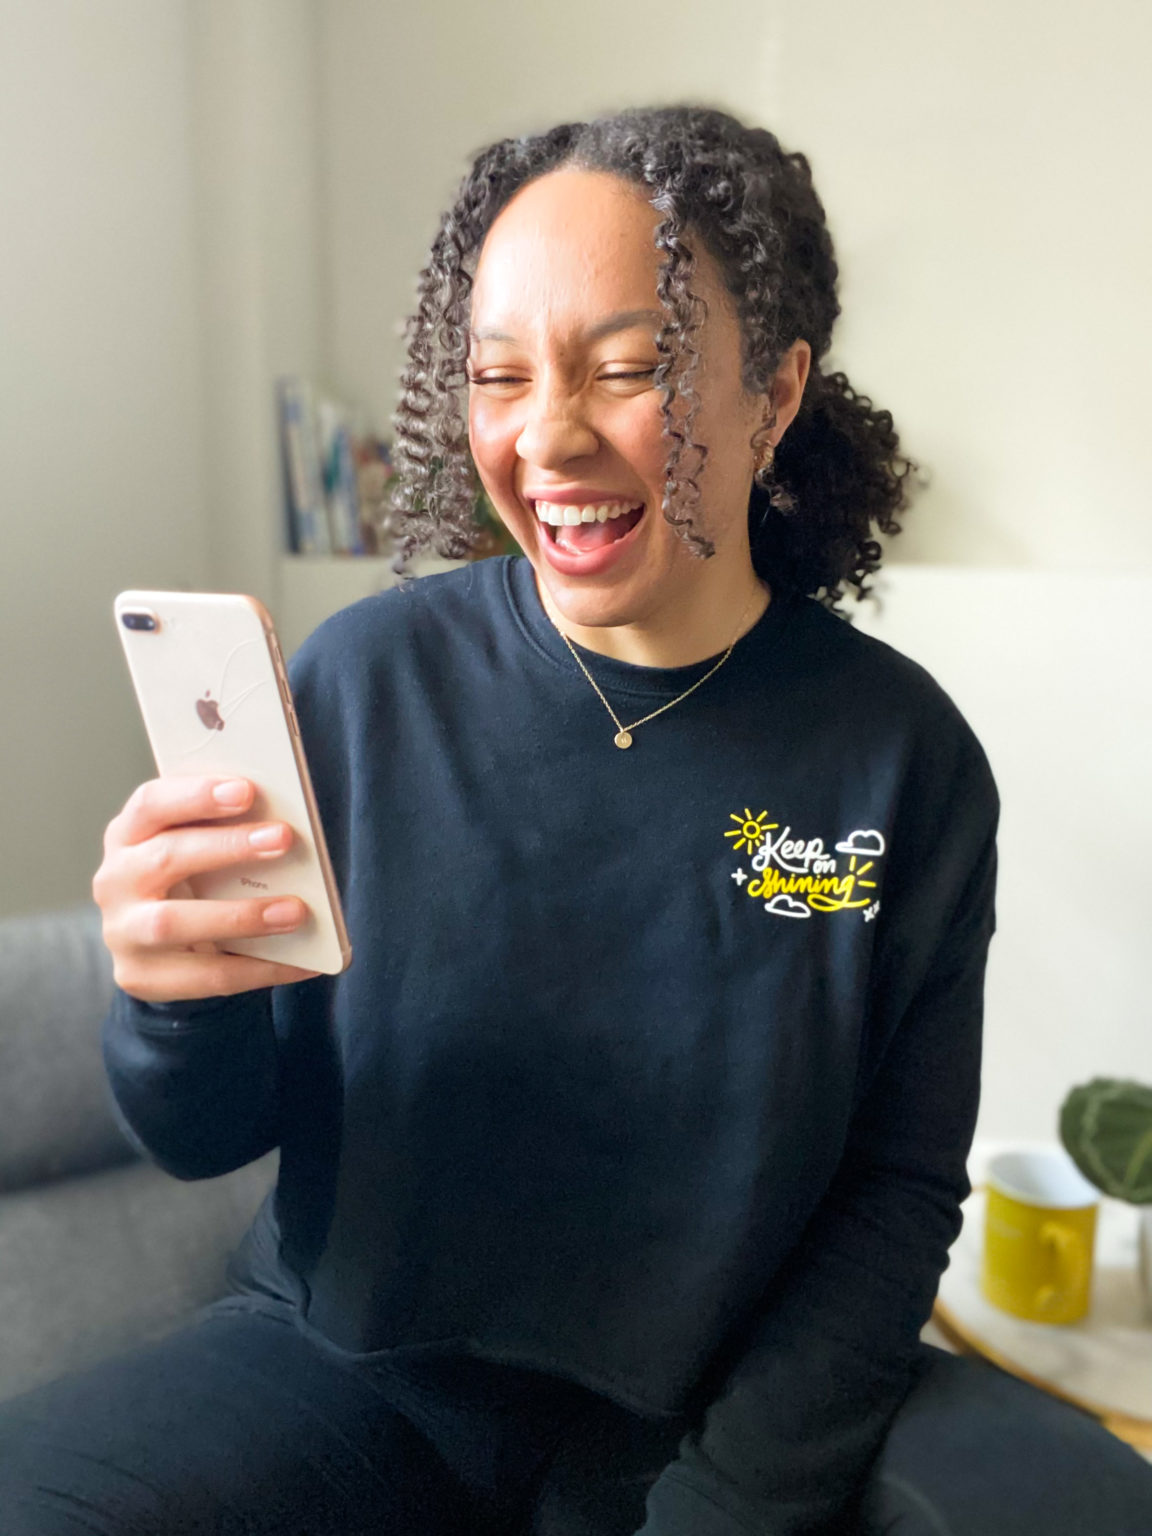 a woman laughs while looking at her phone wearing a cropped black sweatshirt with a white and yellow word design that says "keep on shining"